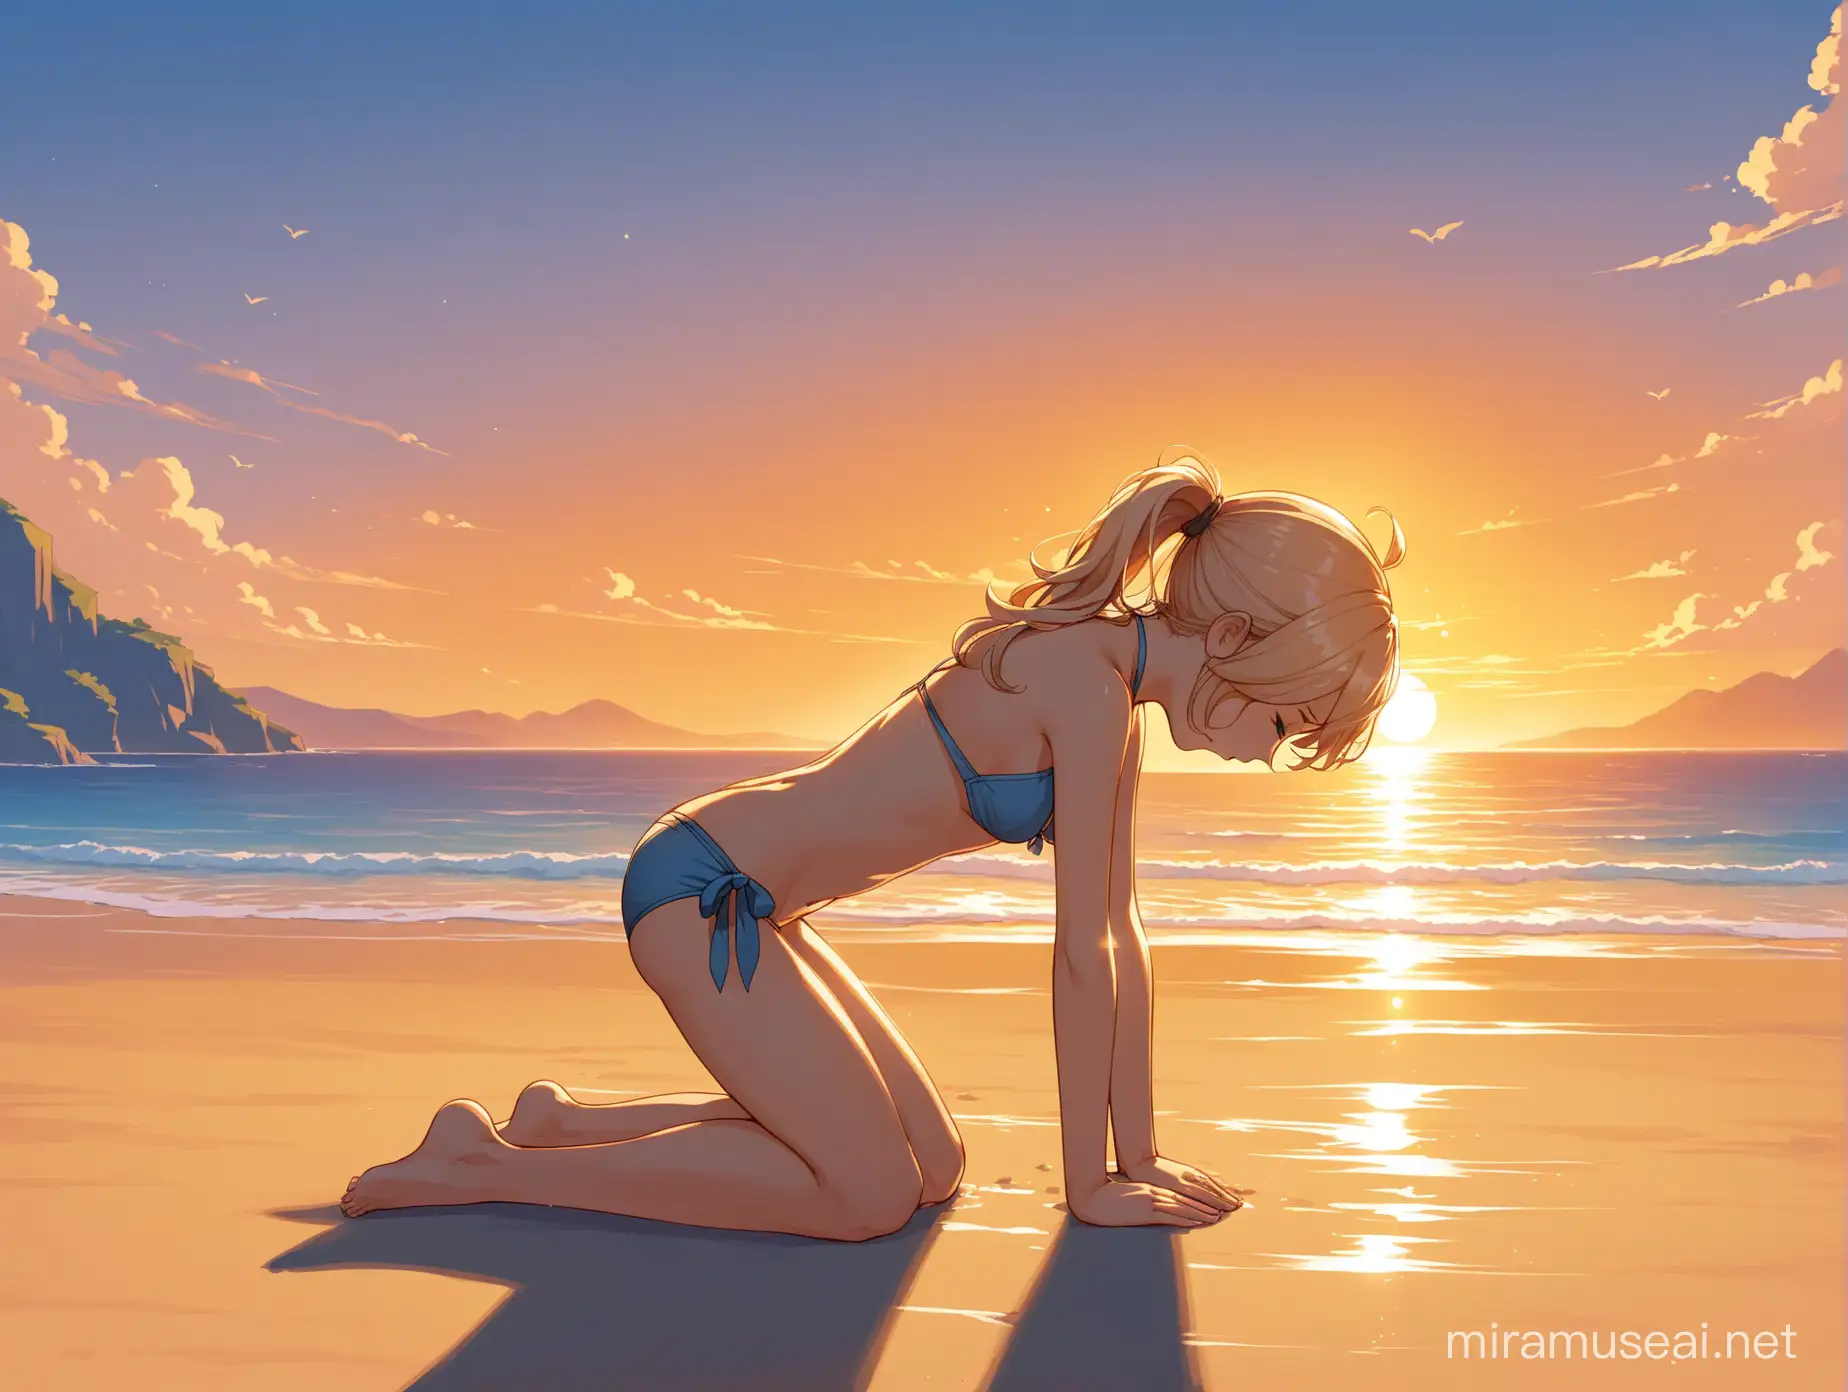 Jean character from Genshin Impact is  praying in sujud in the beach in tiny bikini's sunset
